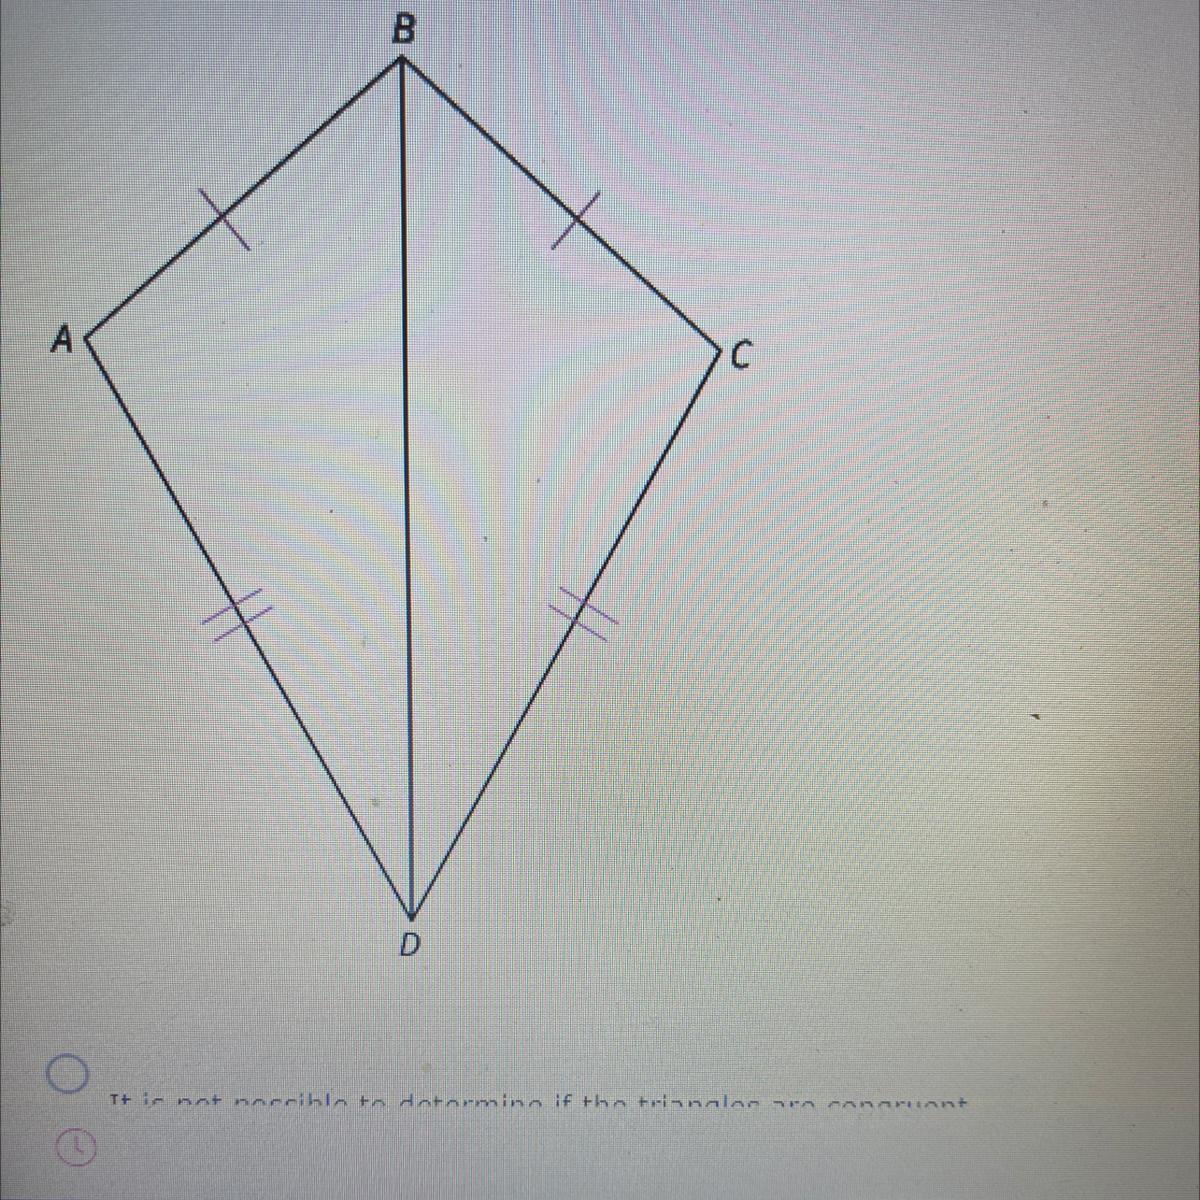 Look At The Figure. How Can You Prove The Triangles Are Congruent?